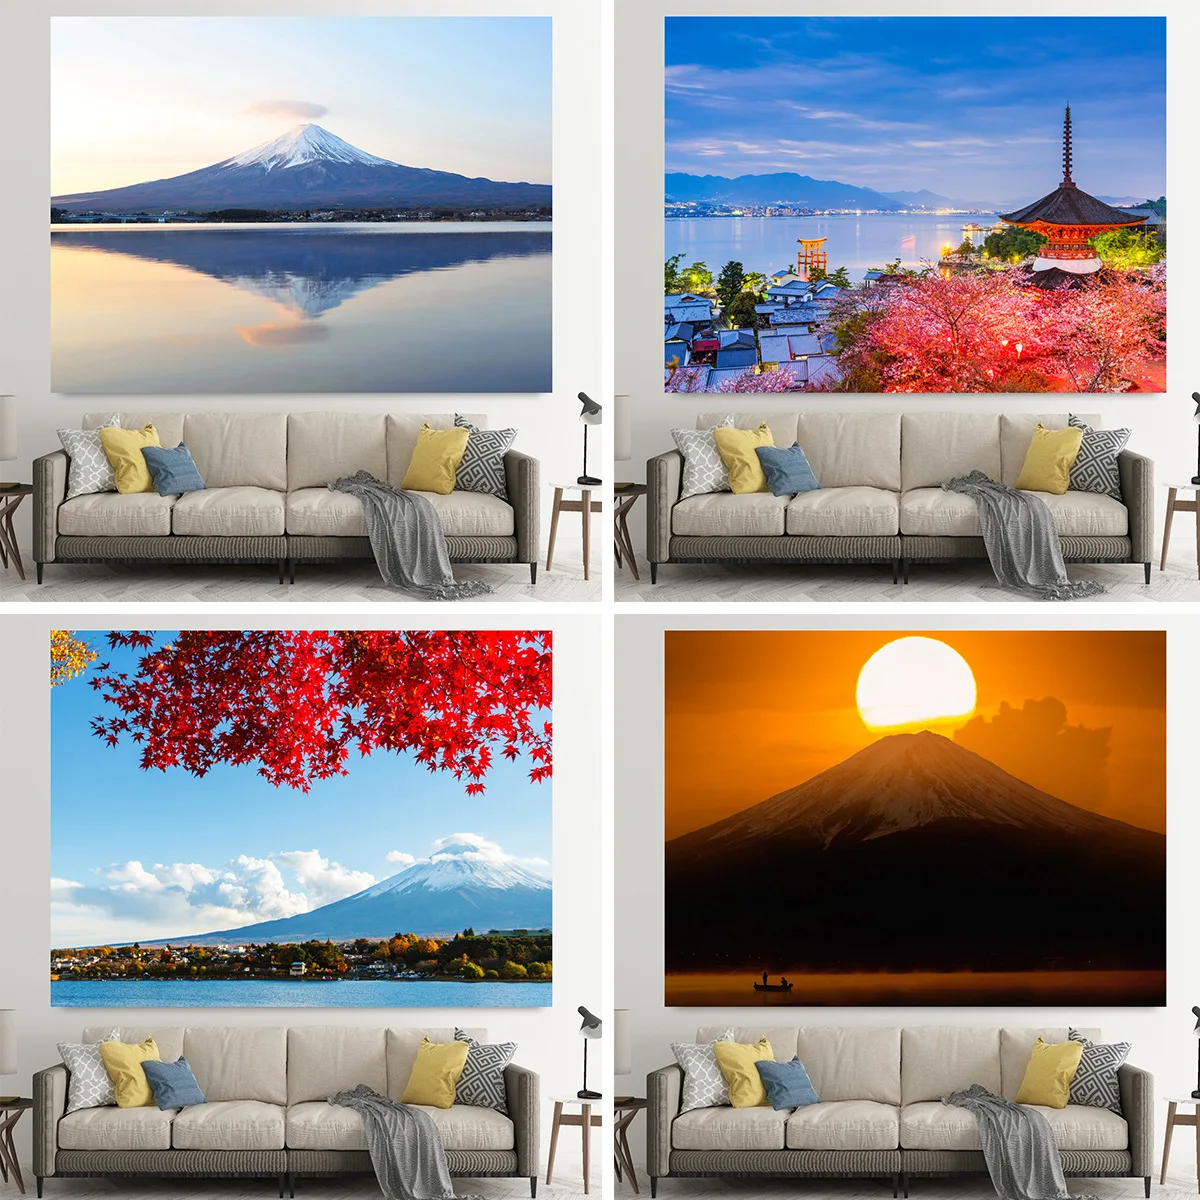 

Mount Fuji Natural Scenery Hanging Cloth Living Room Bedroom Bedside Background Wall Cloth Photo Cloth Farm Home Decoration